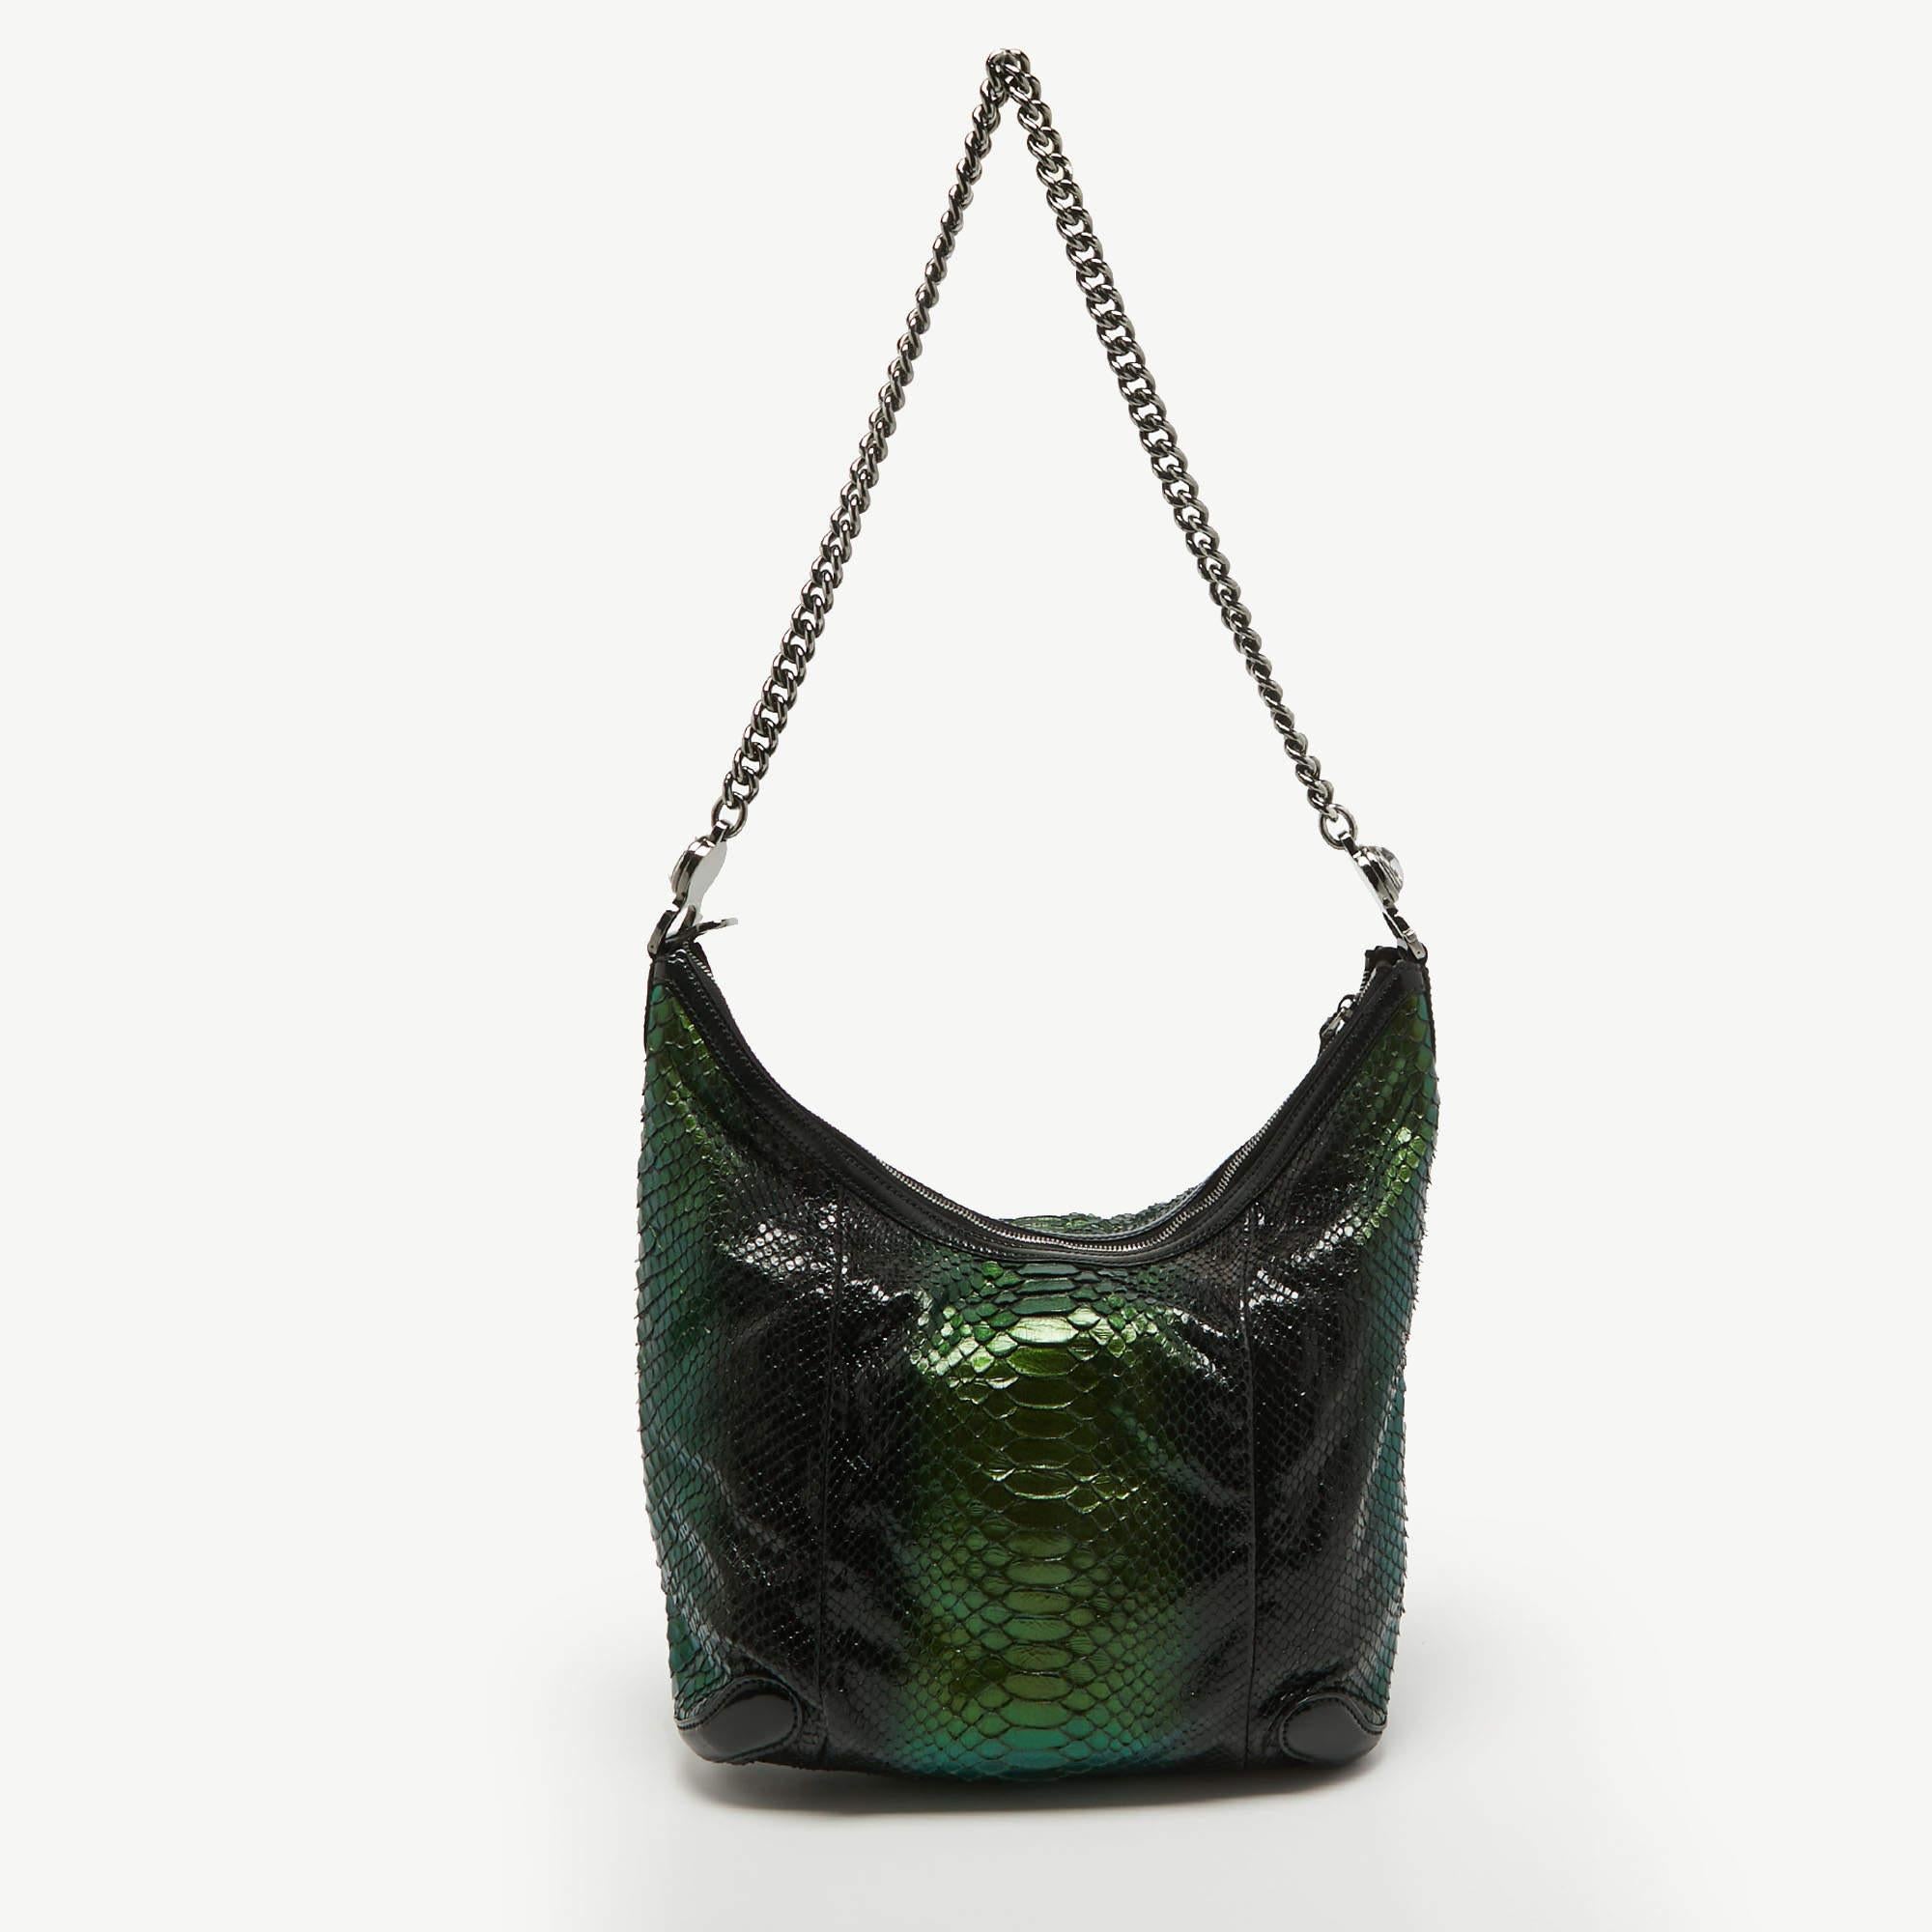 This Gucci hobo is a result of blending high crafting skills with a practical design. It arrives with a durable exterior completed by luxe detailing. It is an accessory that you can count on.

